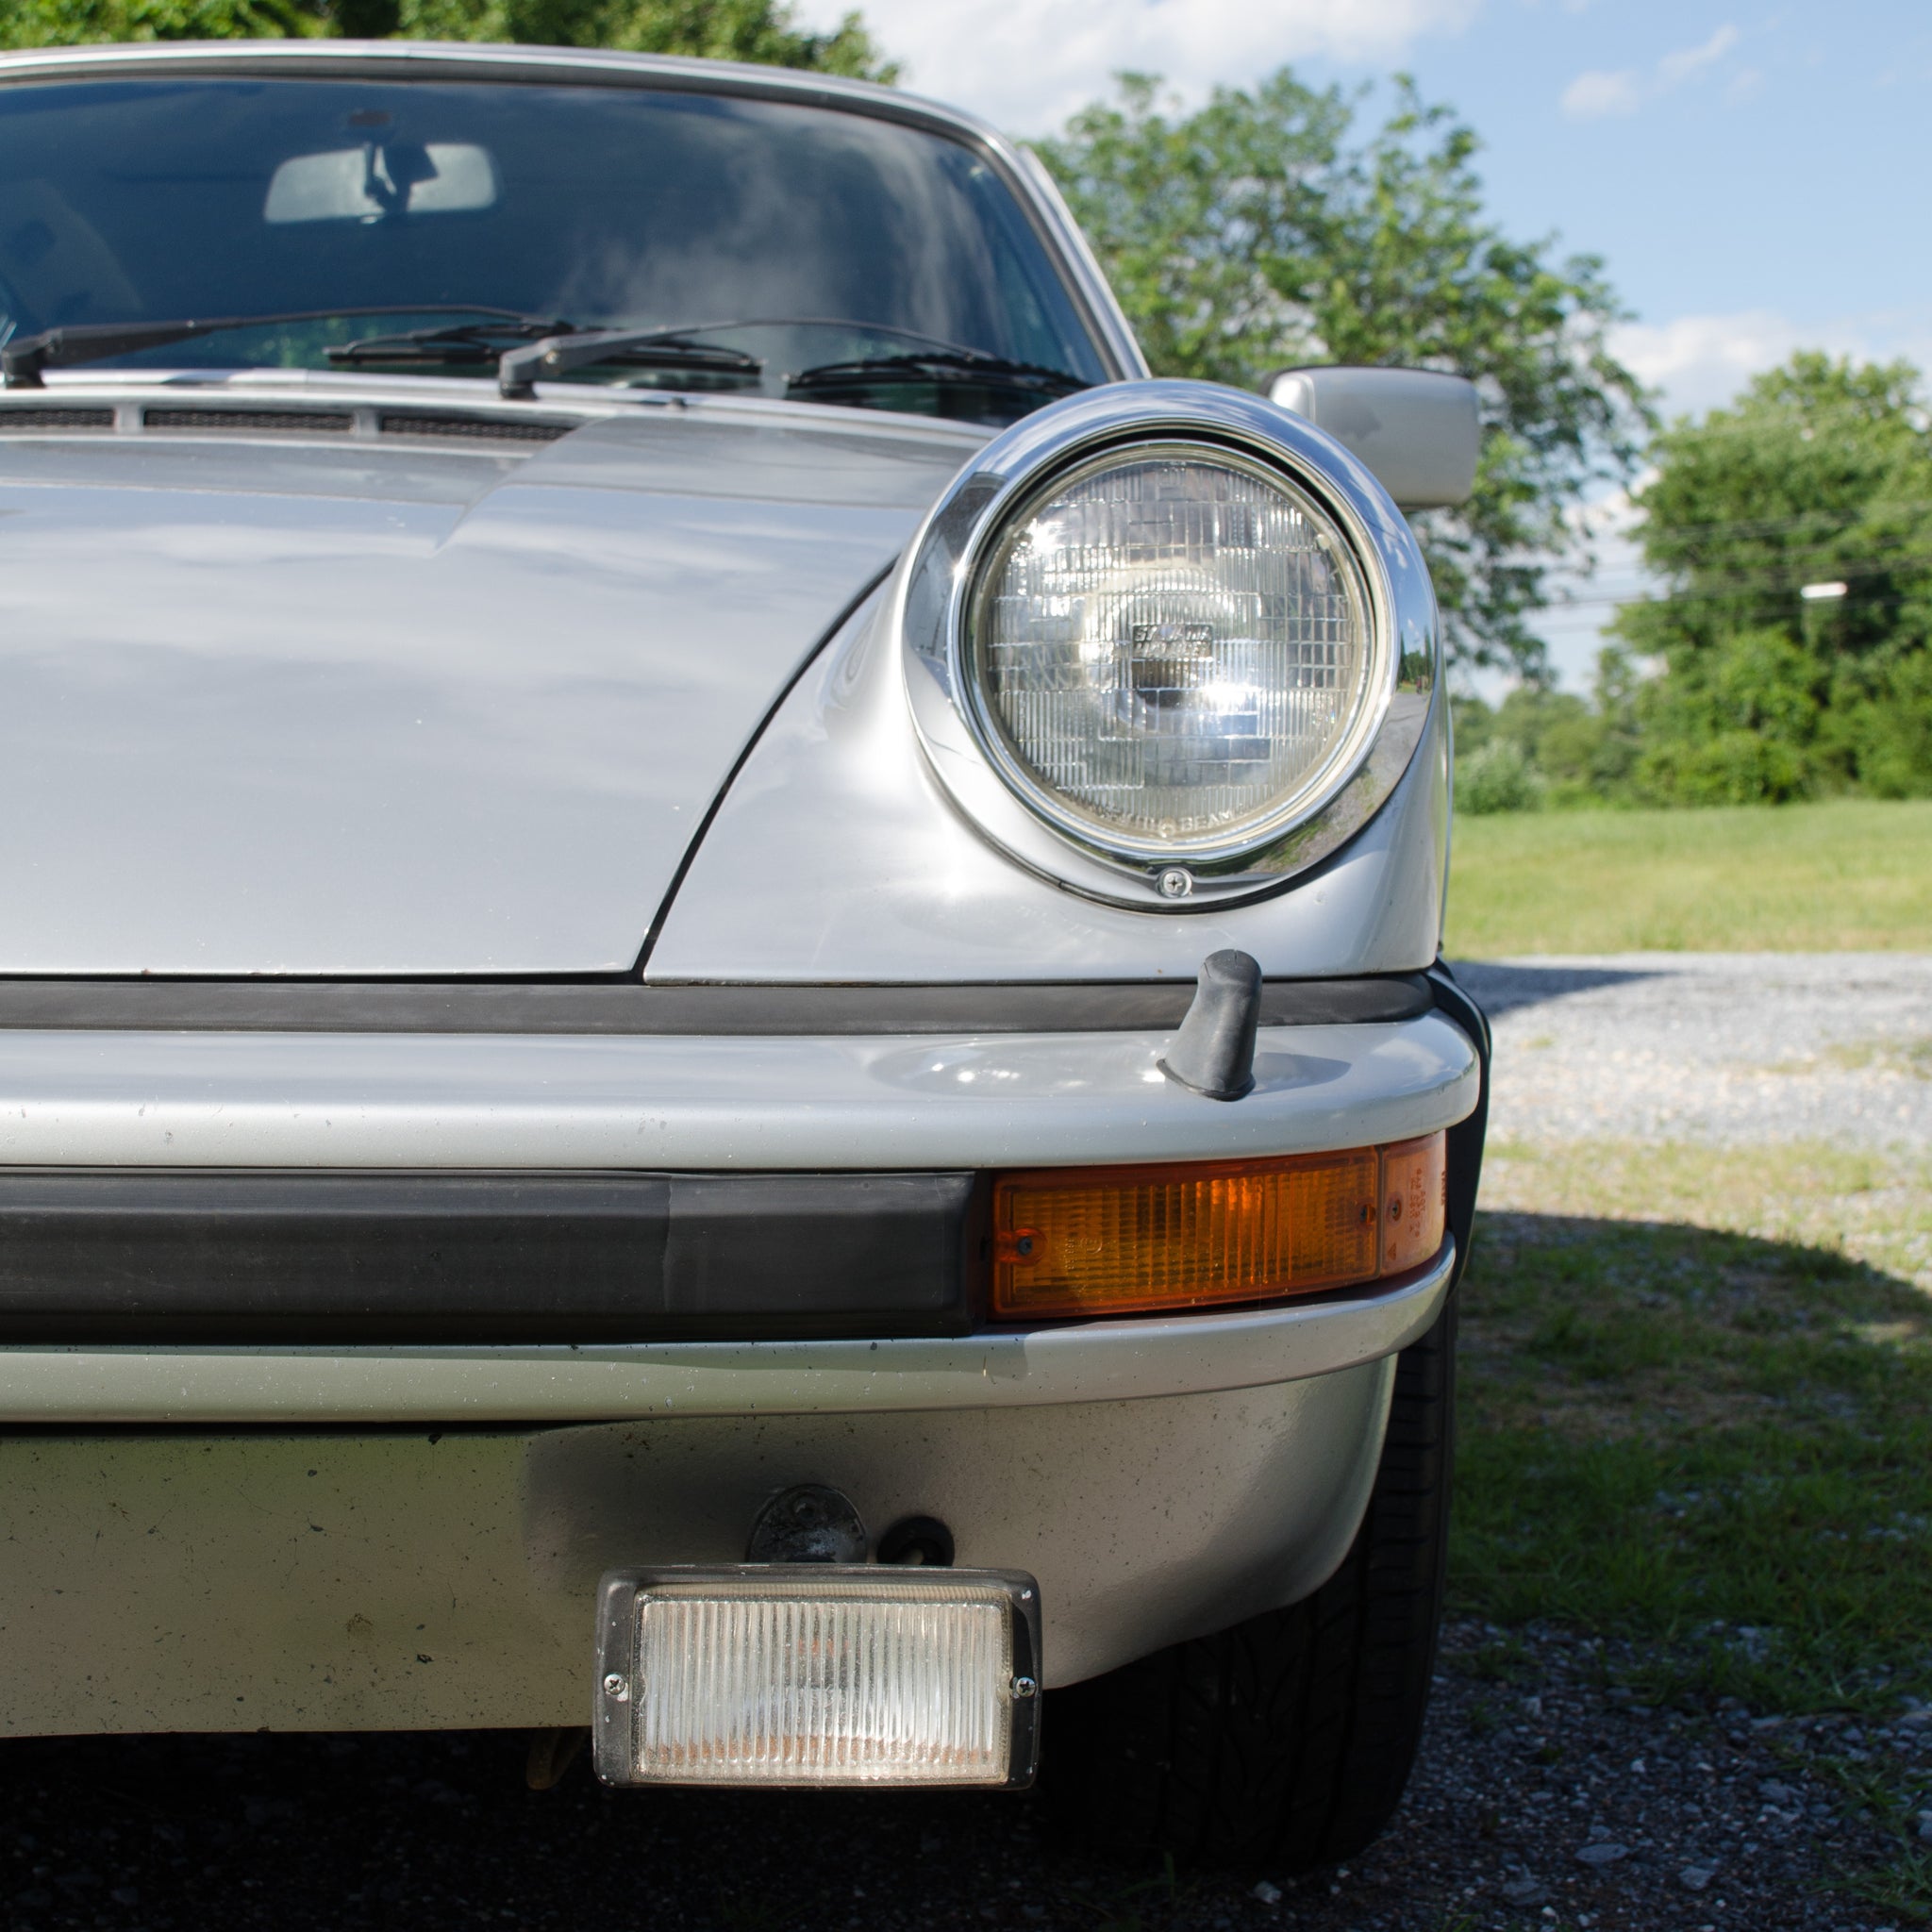 SOLD 1977 Porsche 911S Sunroof Coupe All Original, Matching Numbers